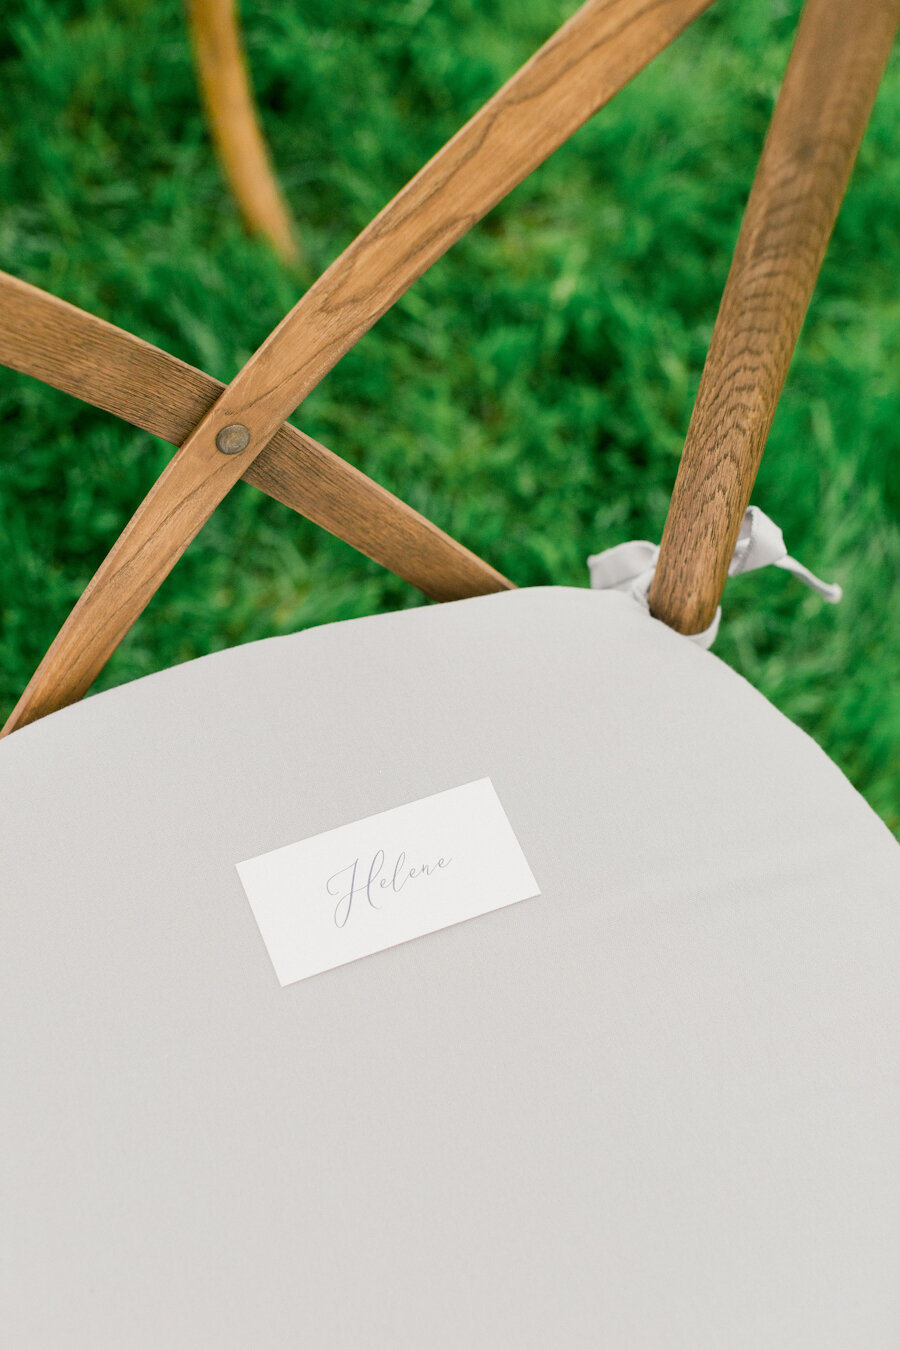 outdoor-wedding-ceremony-reserved-seating-signs.jpg